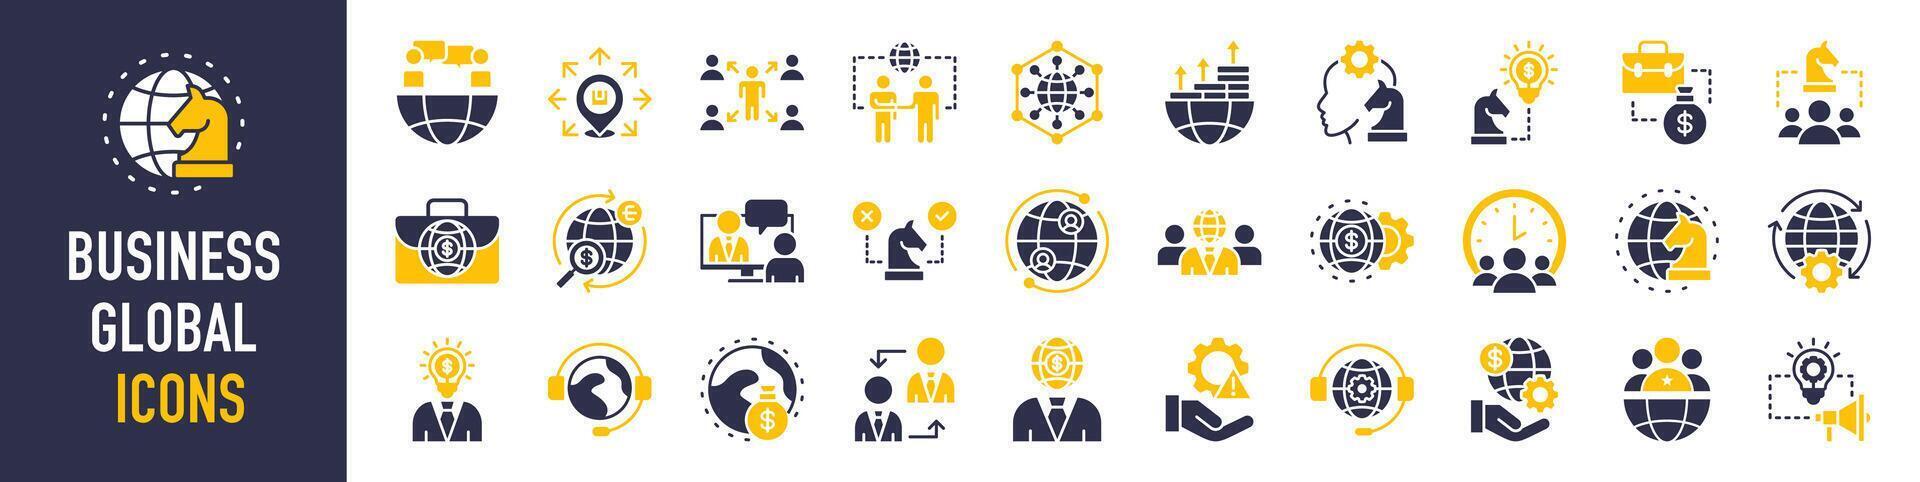 Business global icon set. Business team, meeting, partnership, startup, planning, international organization, company, management, profit and successful key icons. Solid icons vector collection.